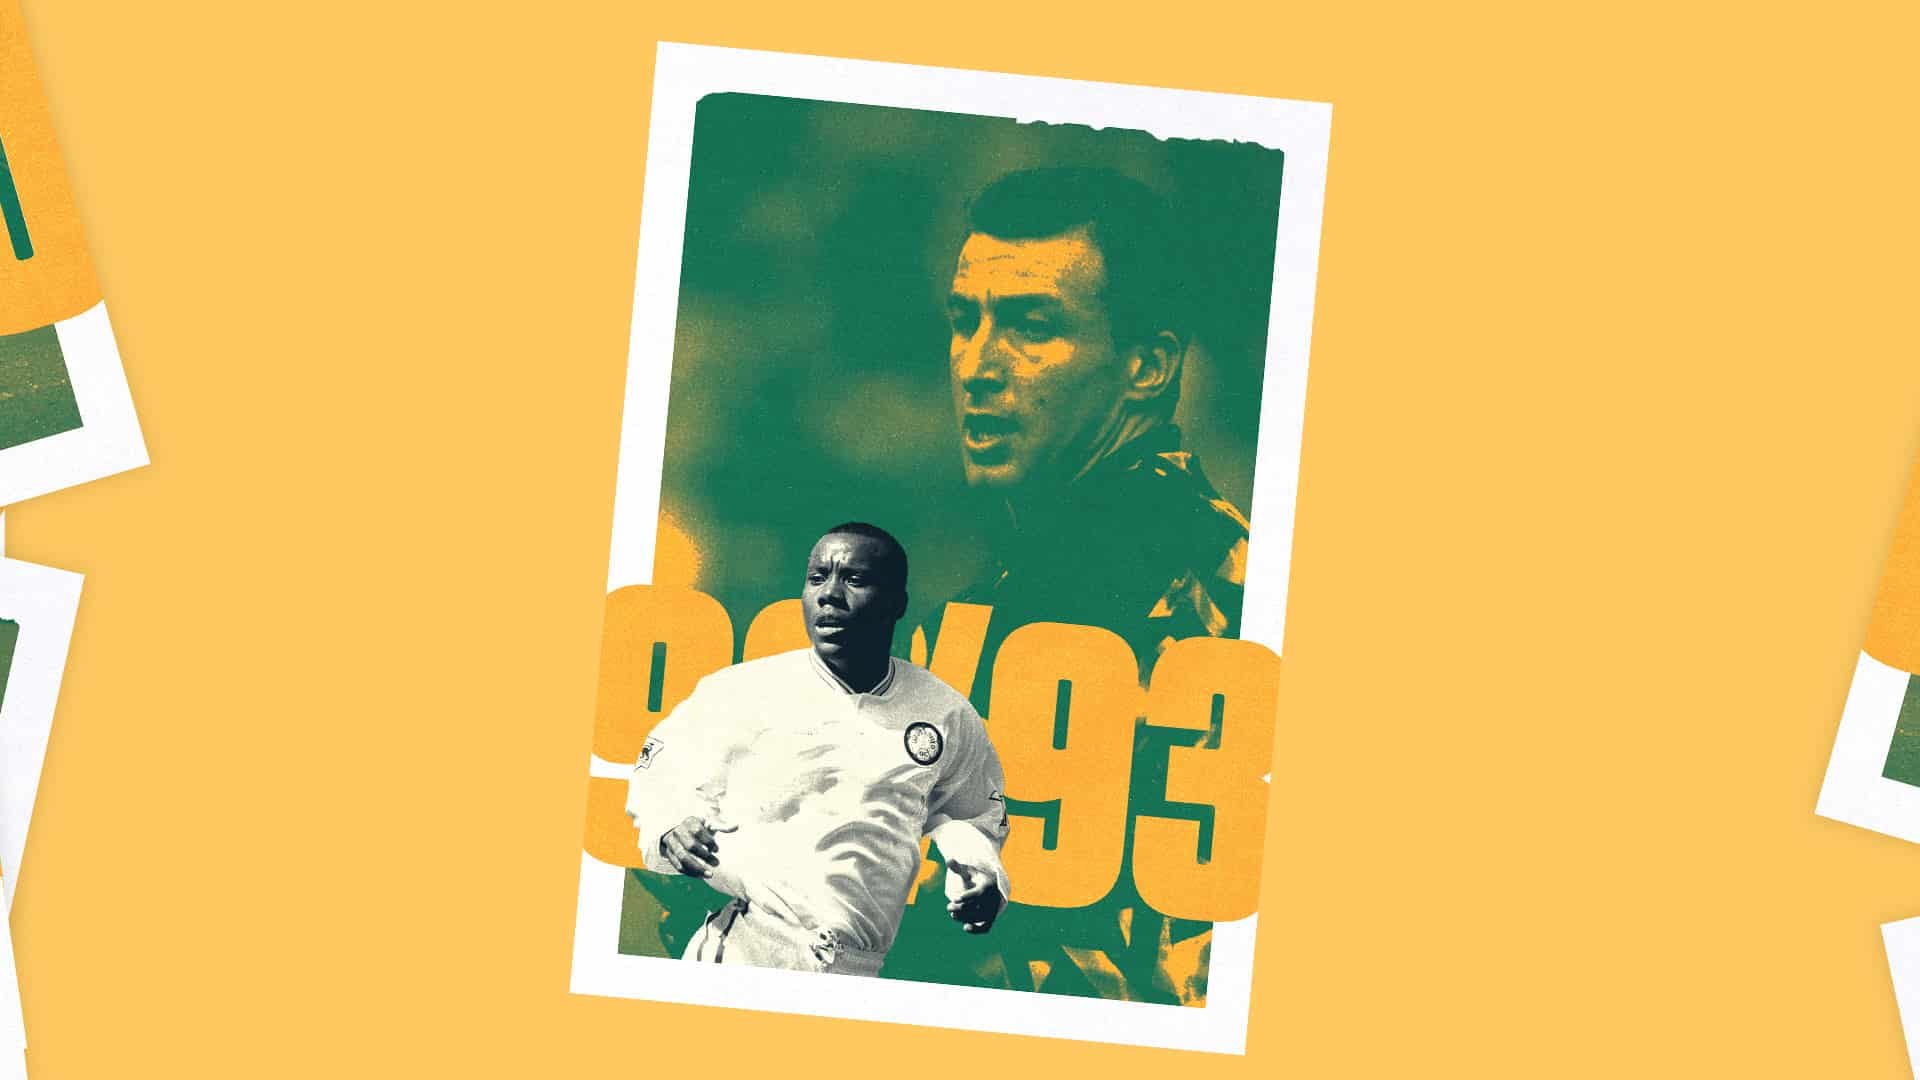 Rod Wallace playing for Leeds, in front of the numbers 92/93, and another image of Mark Beeney playing in goal